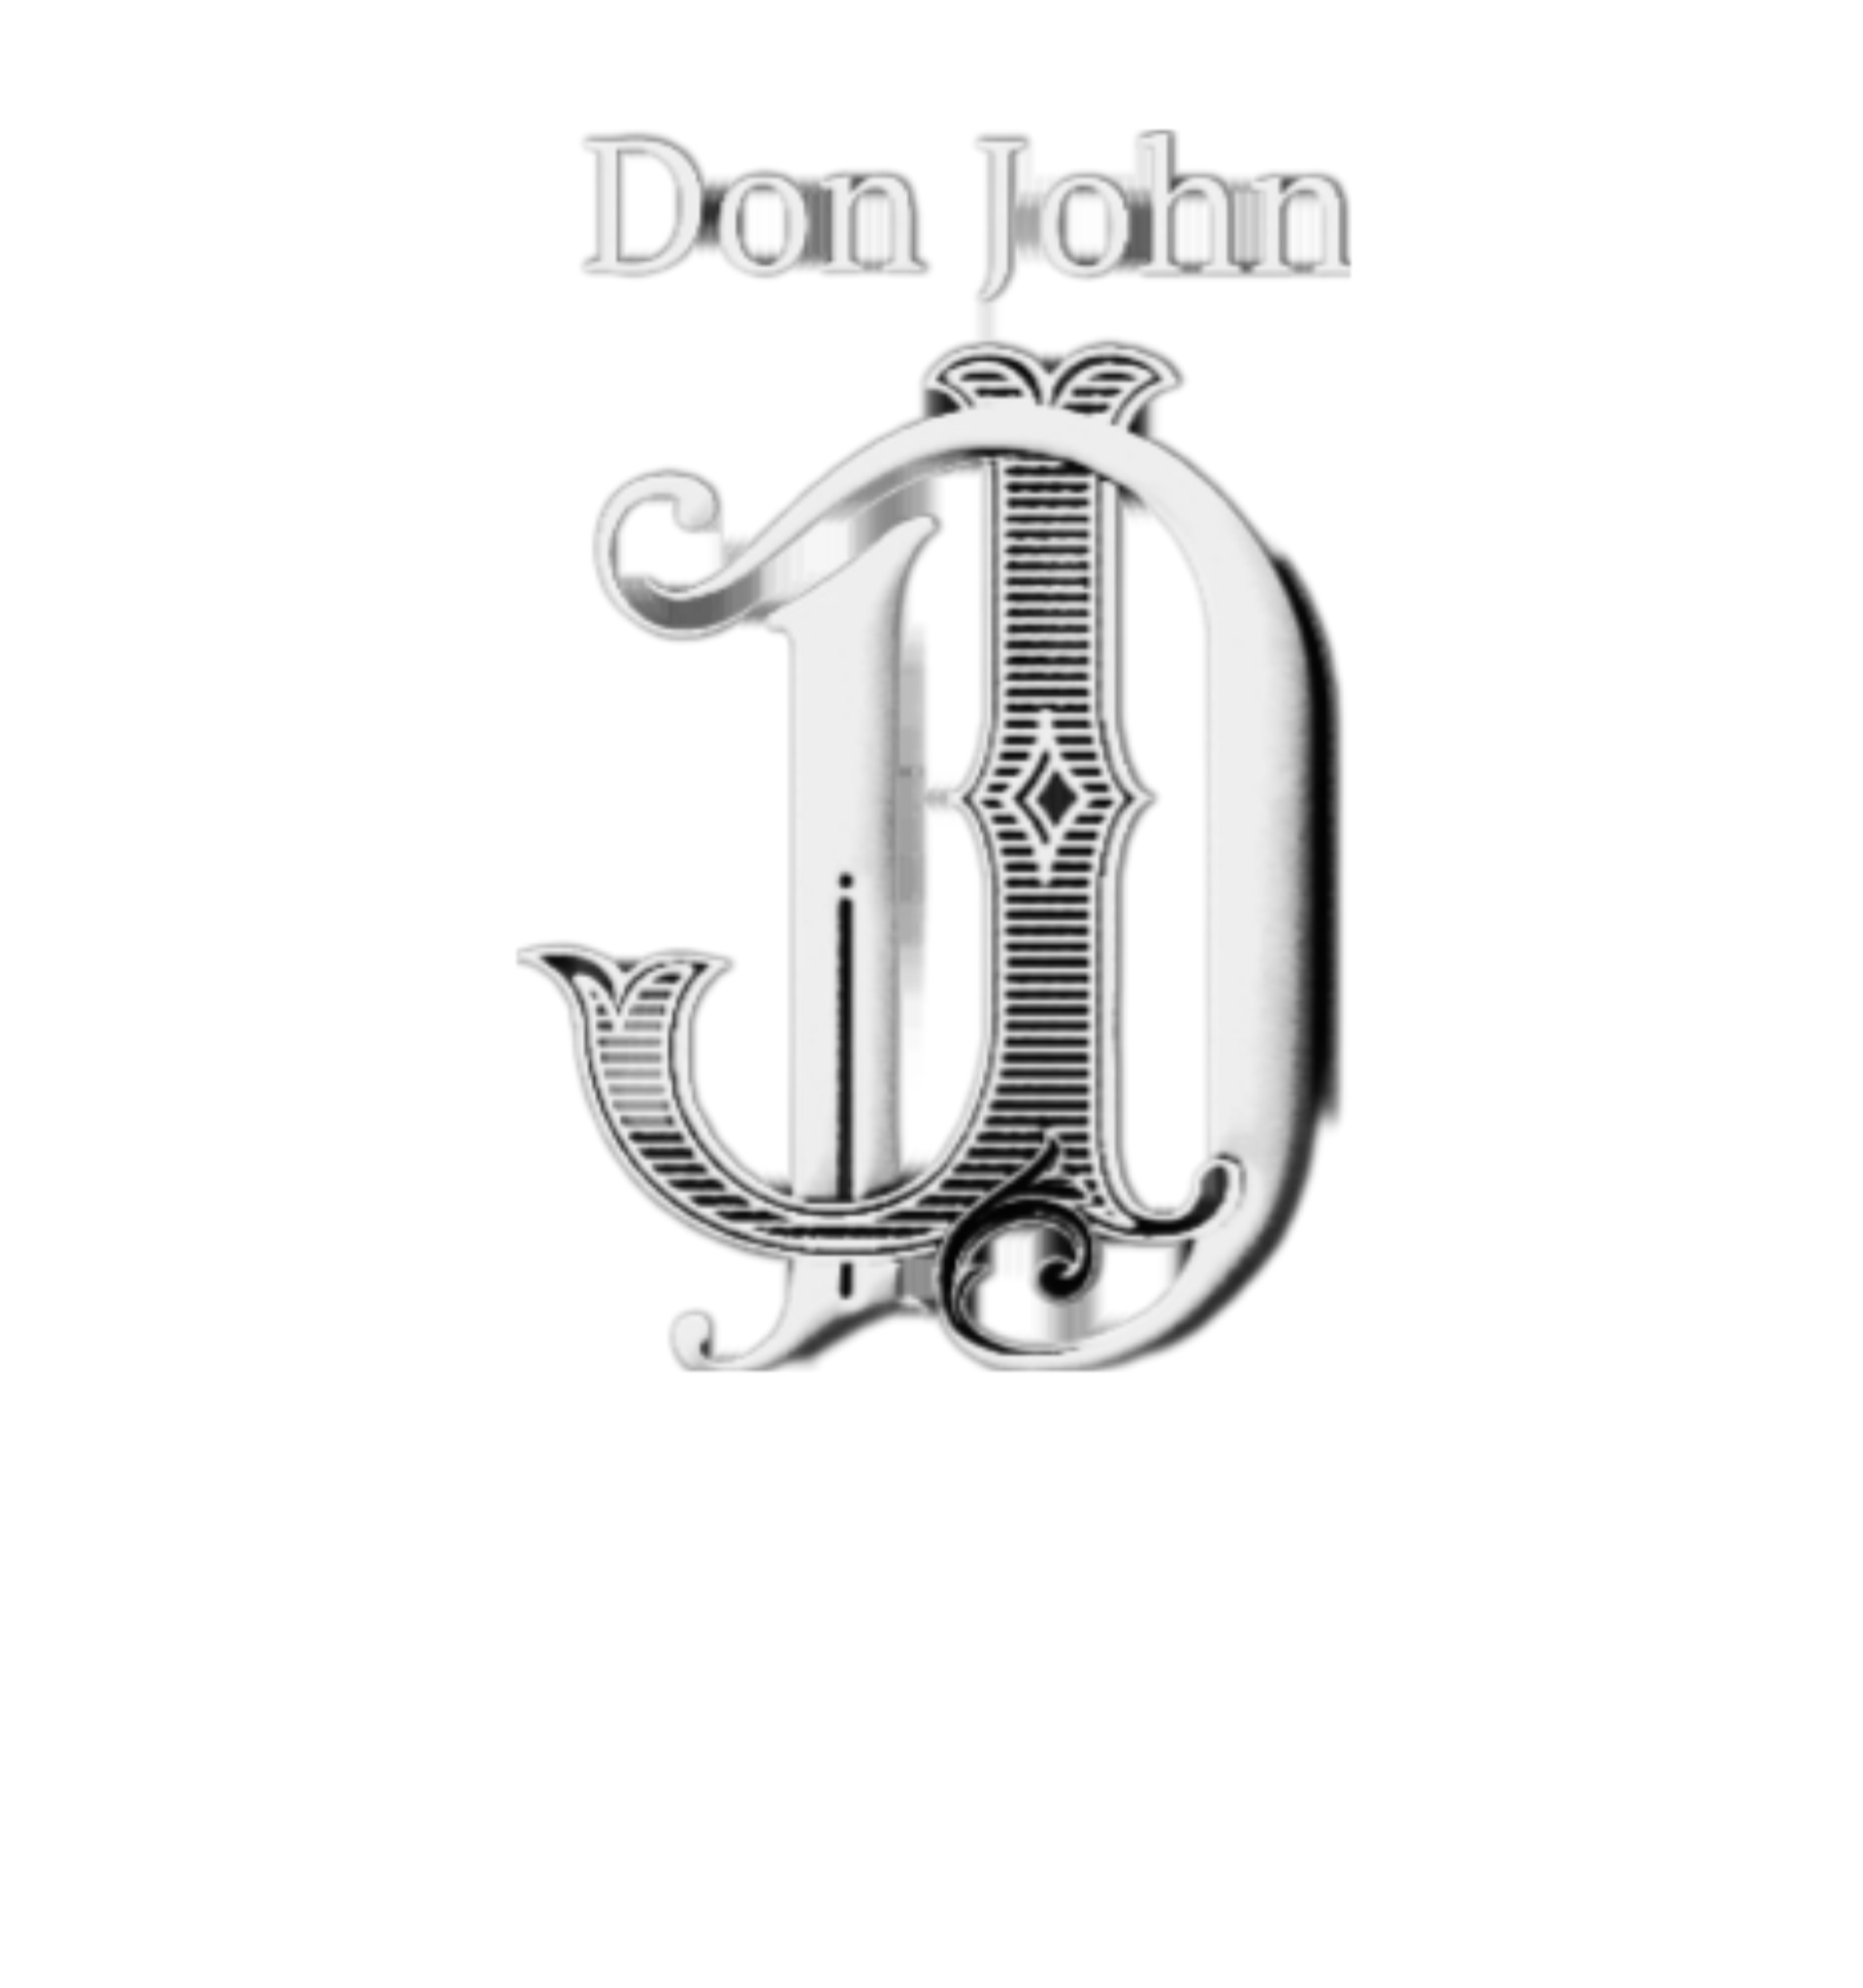 Alaska Collection Tractors Mining Equipment Drills Boats Wind Turbines & Snowmobiles. Wholesale Prices Delivered To The Harbor.